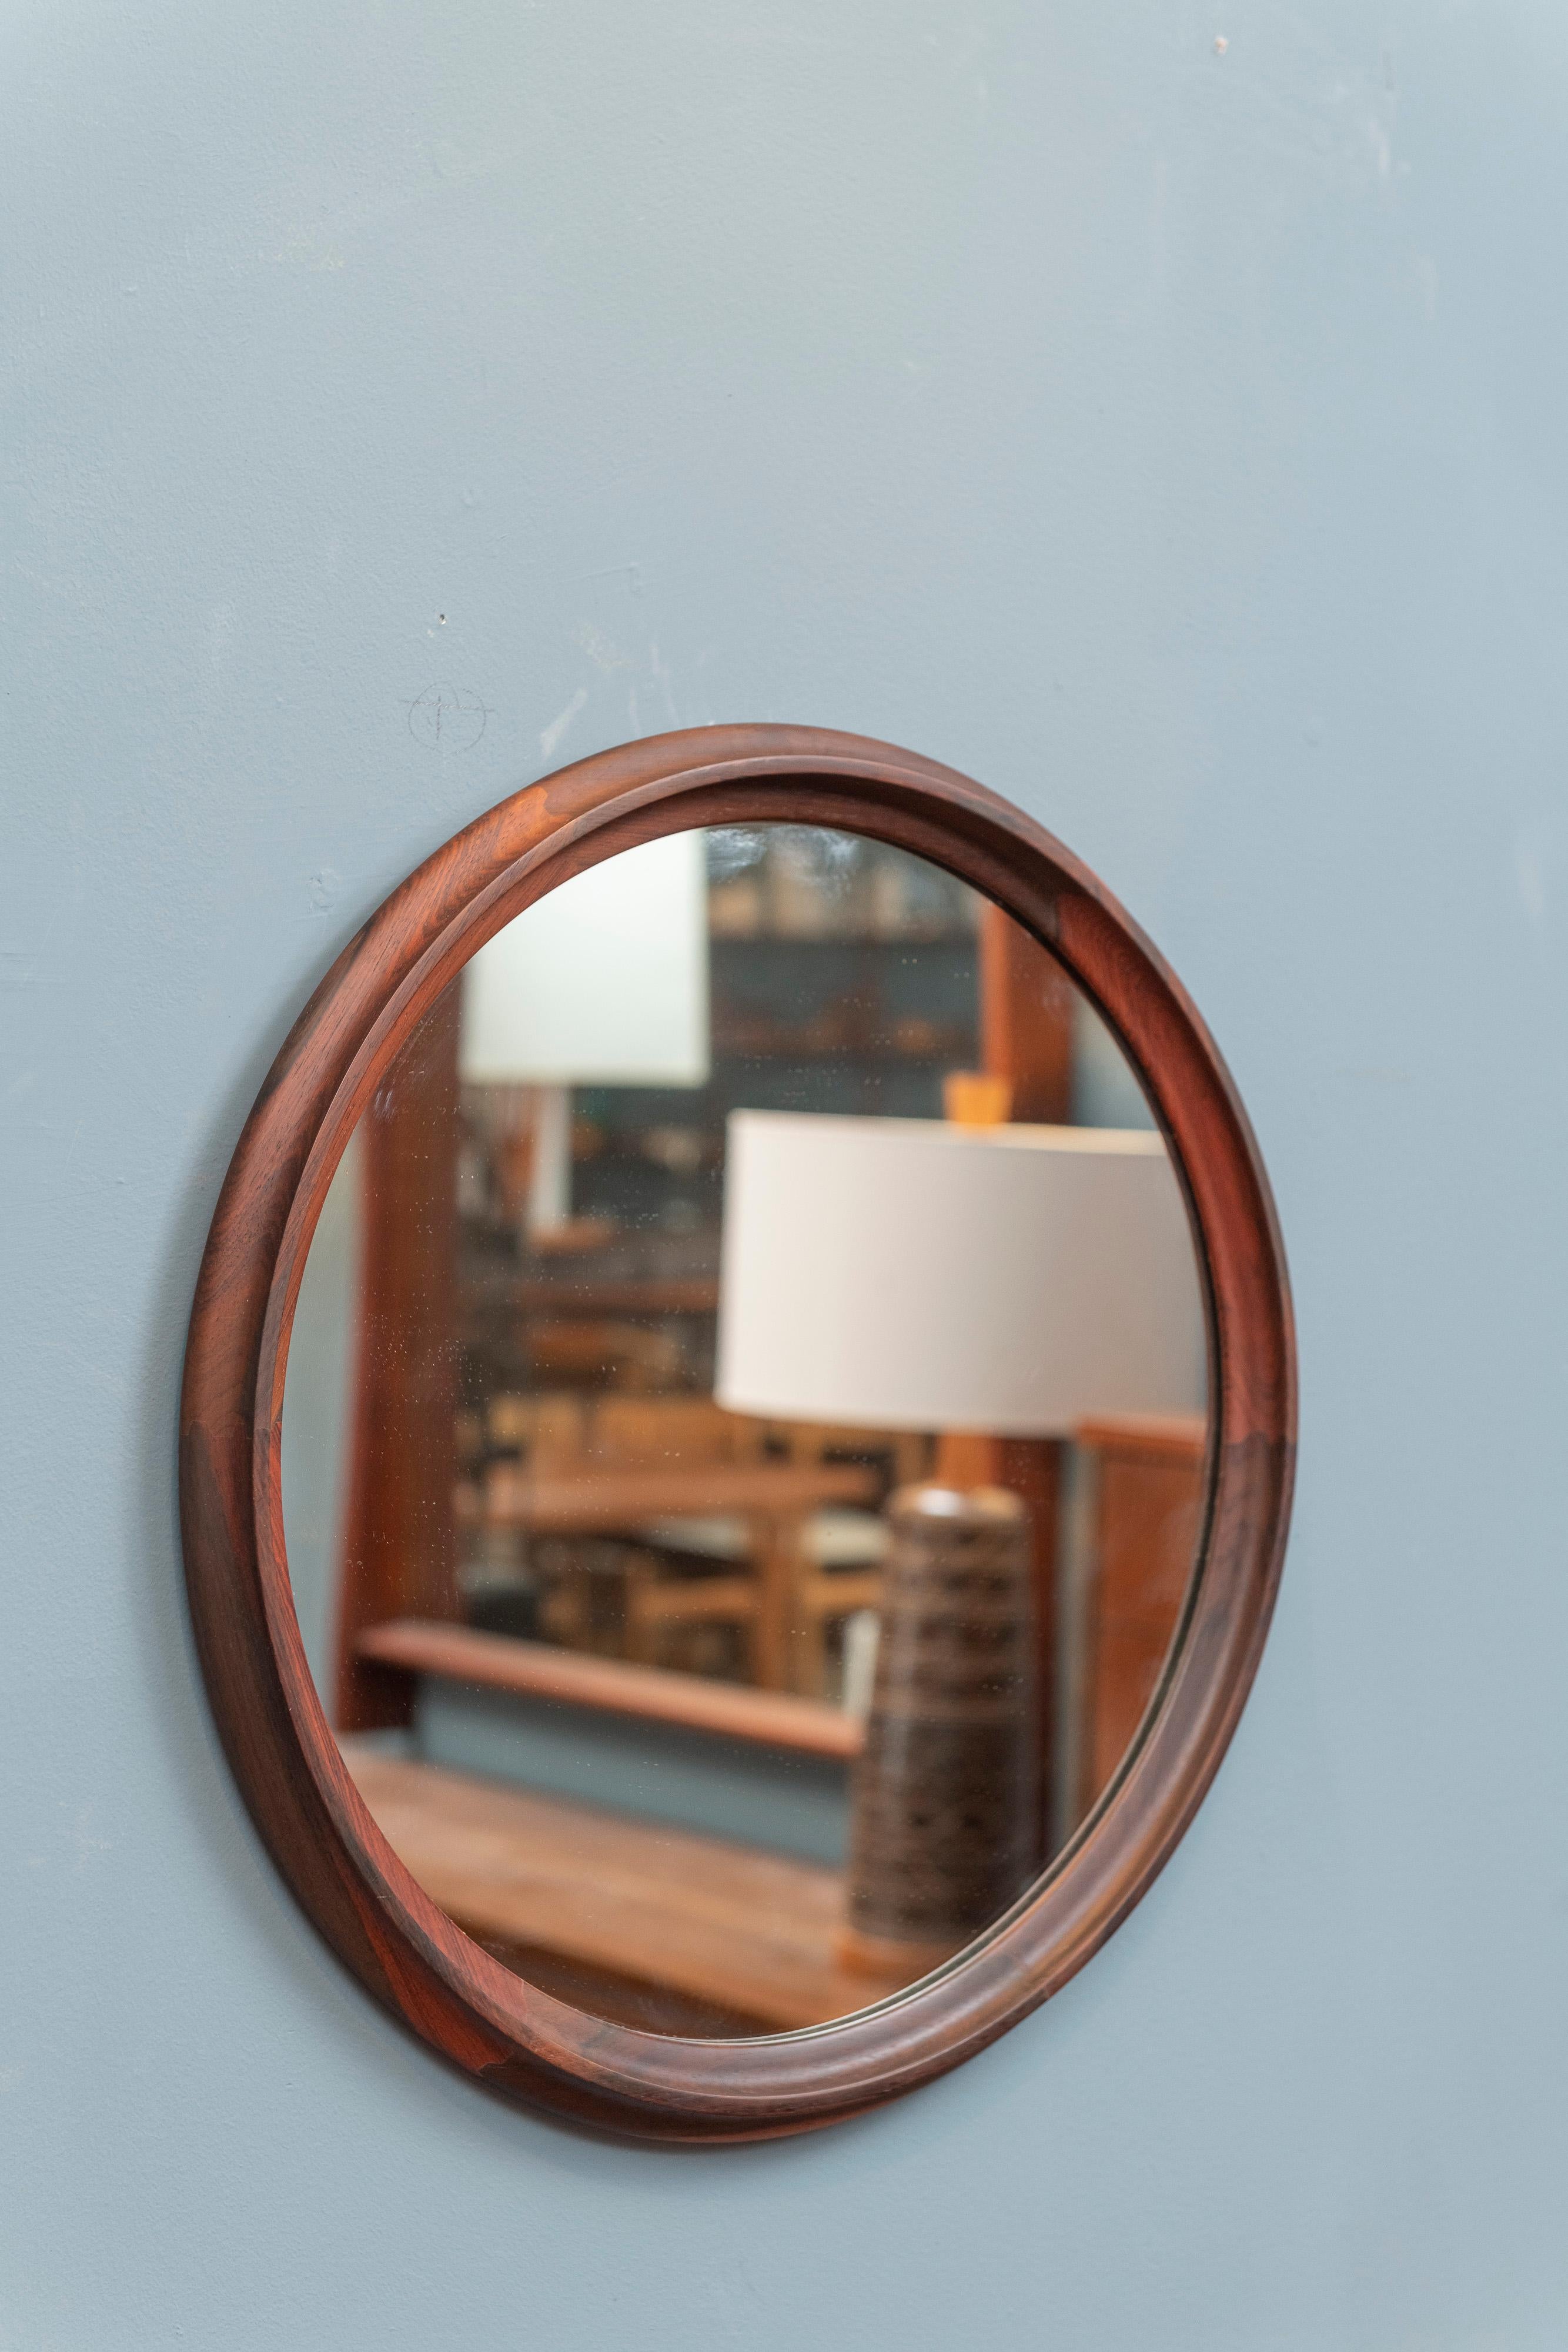 Scandinavian Modern pair of rosewood sculpted edge rosewood wall mirrors, Denmark. High quality construction and attention to design, ready to enjoy.